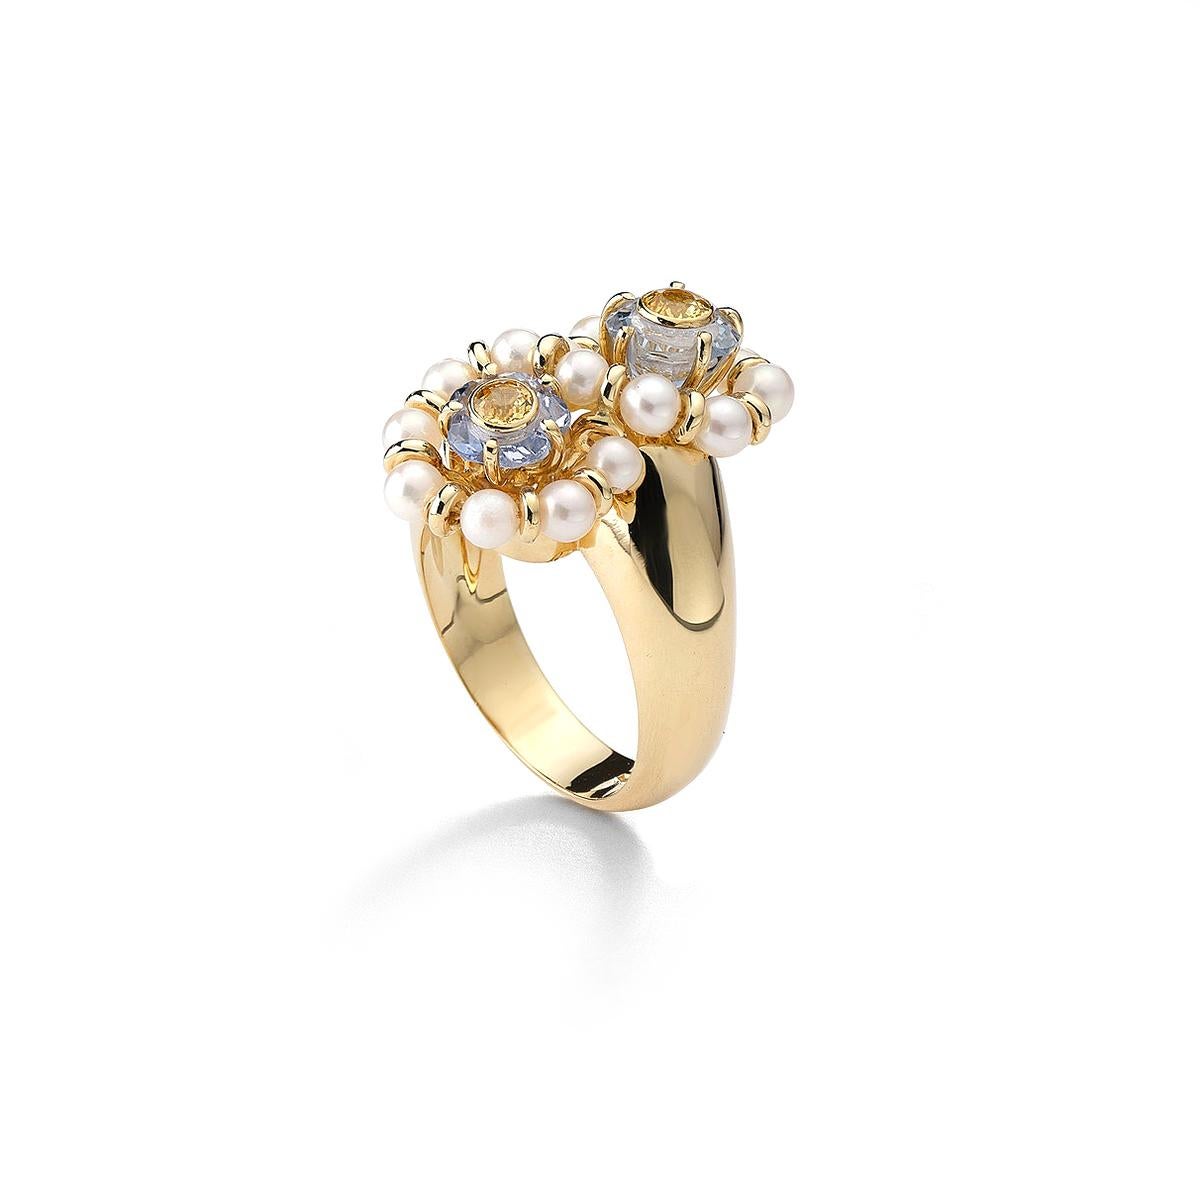 Ring in 18kt yellow gold set with 15 pearls 4.00 cts and 2 colored stones 3.76 cts Size 56    